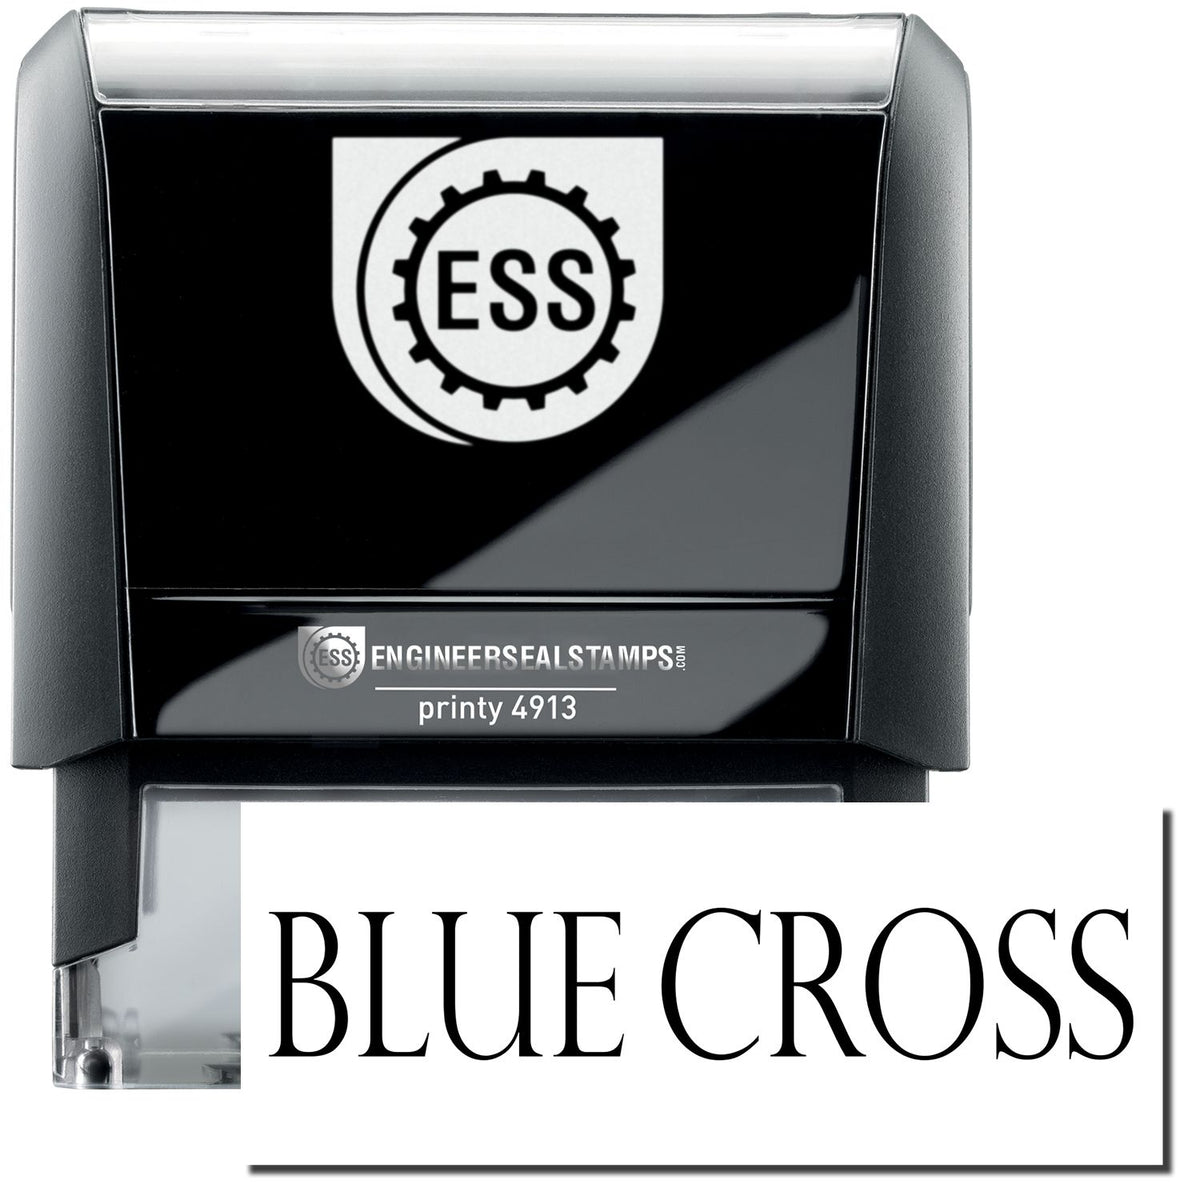 A self-inking stamp with a stamped image showing how the text &quot;BLUE CROSS&quot; in a large font is displayed by it.